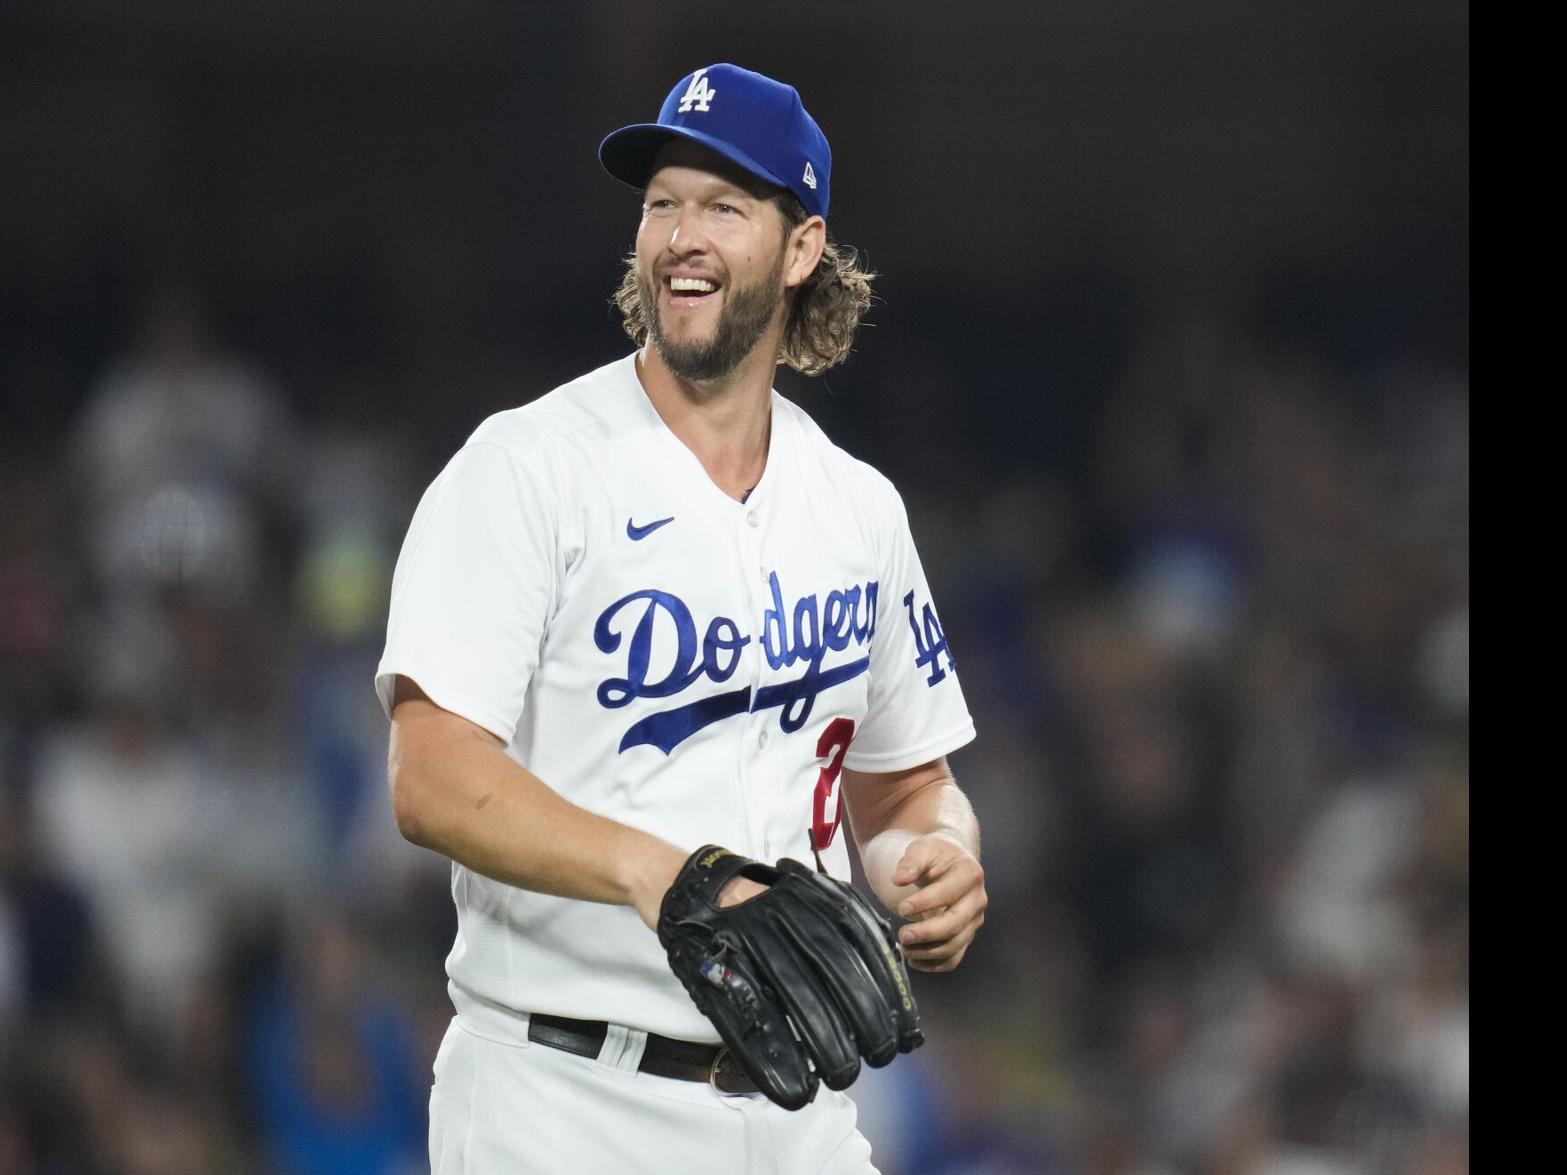 Giants beat Dodgers 2-1 as Kershaw loses for first time since May 21